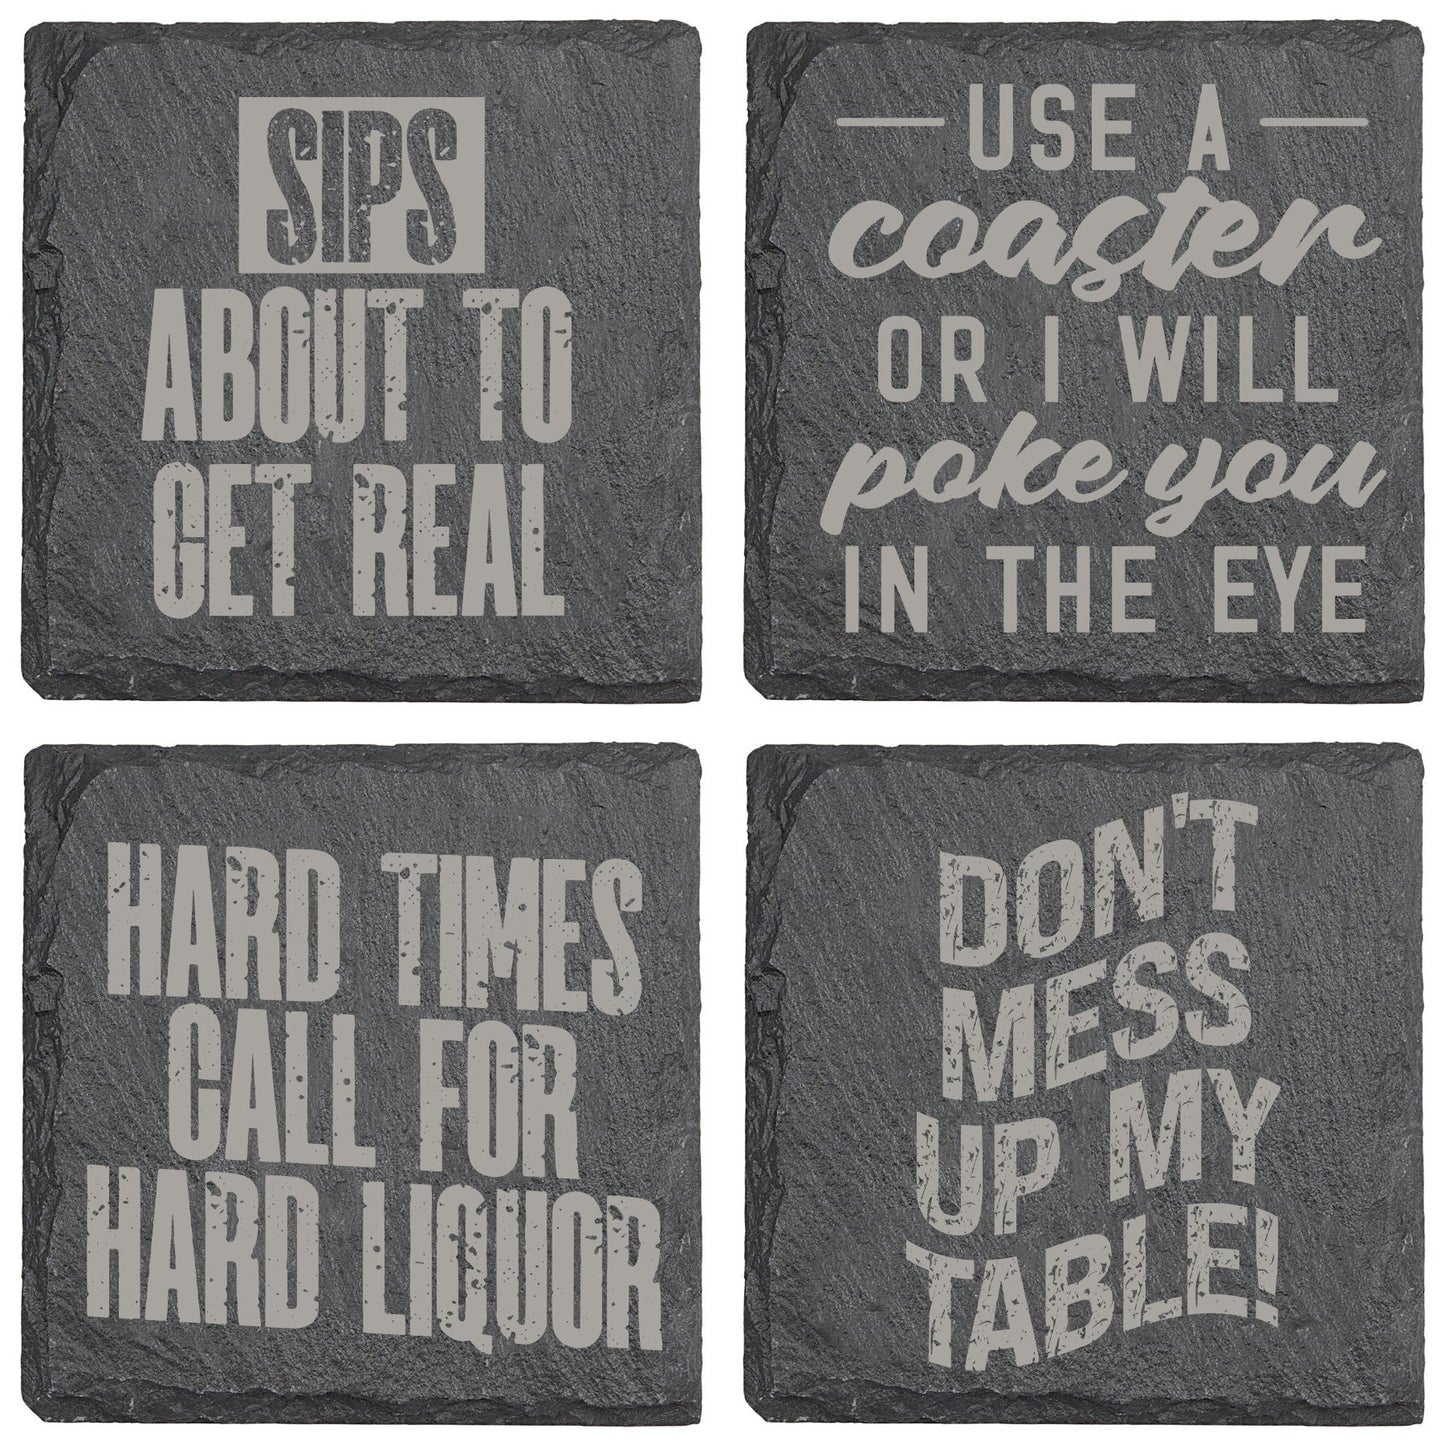 Don't Mess Up My Table Slate Coaster